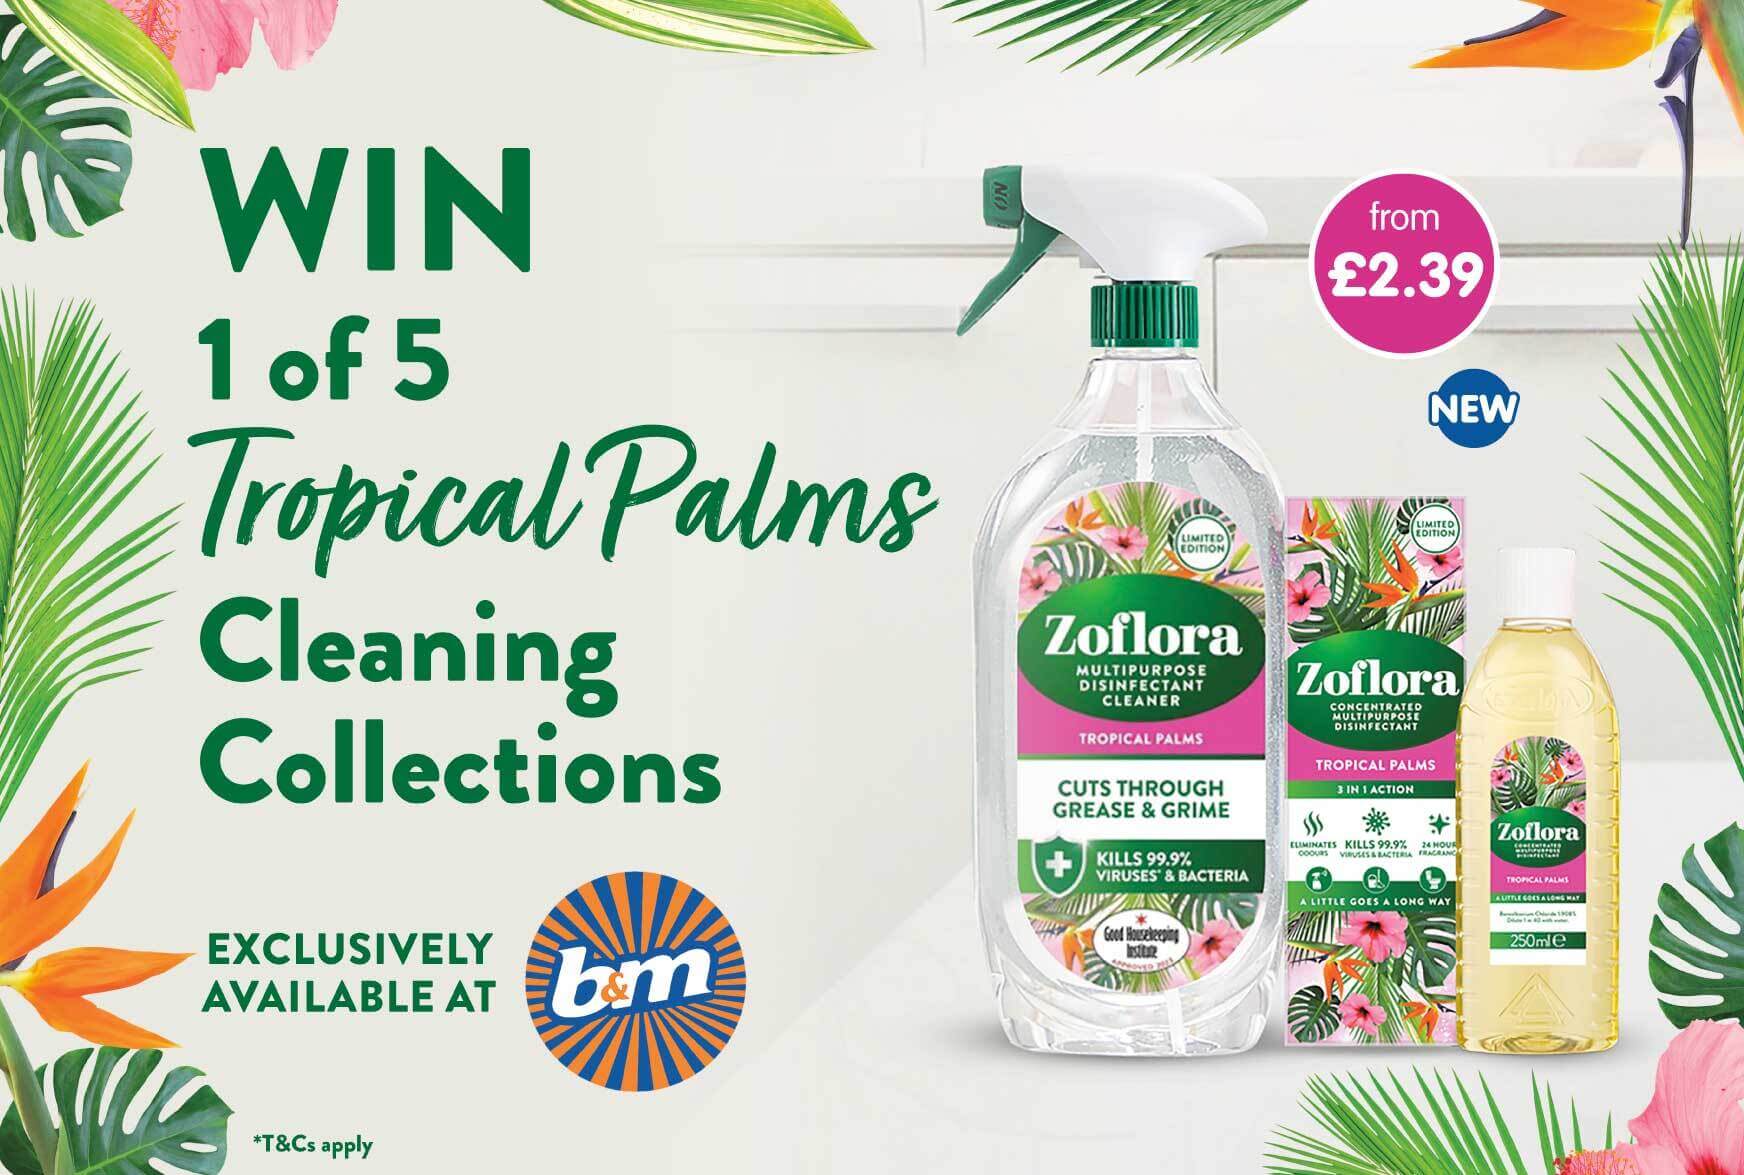 Win a Zoflora Tropical Palms Collection with B&M